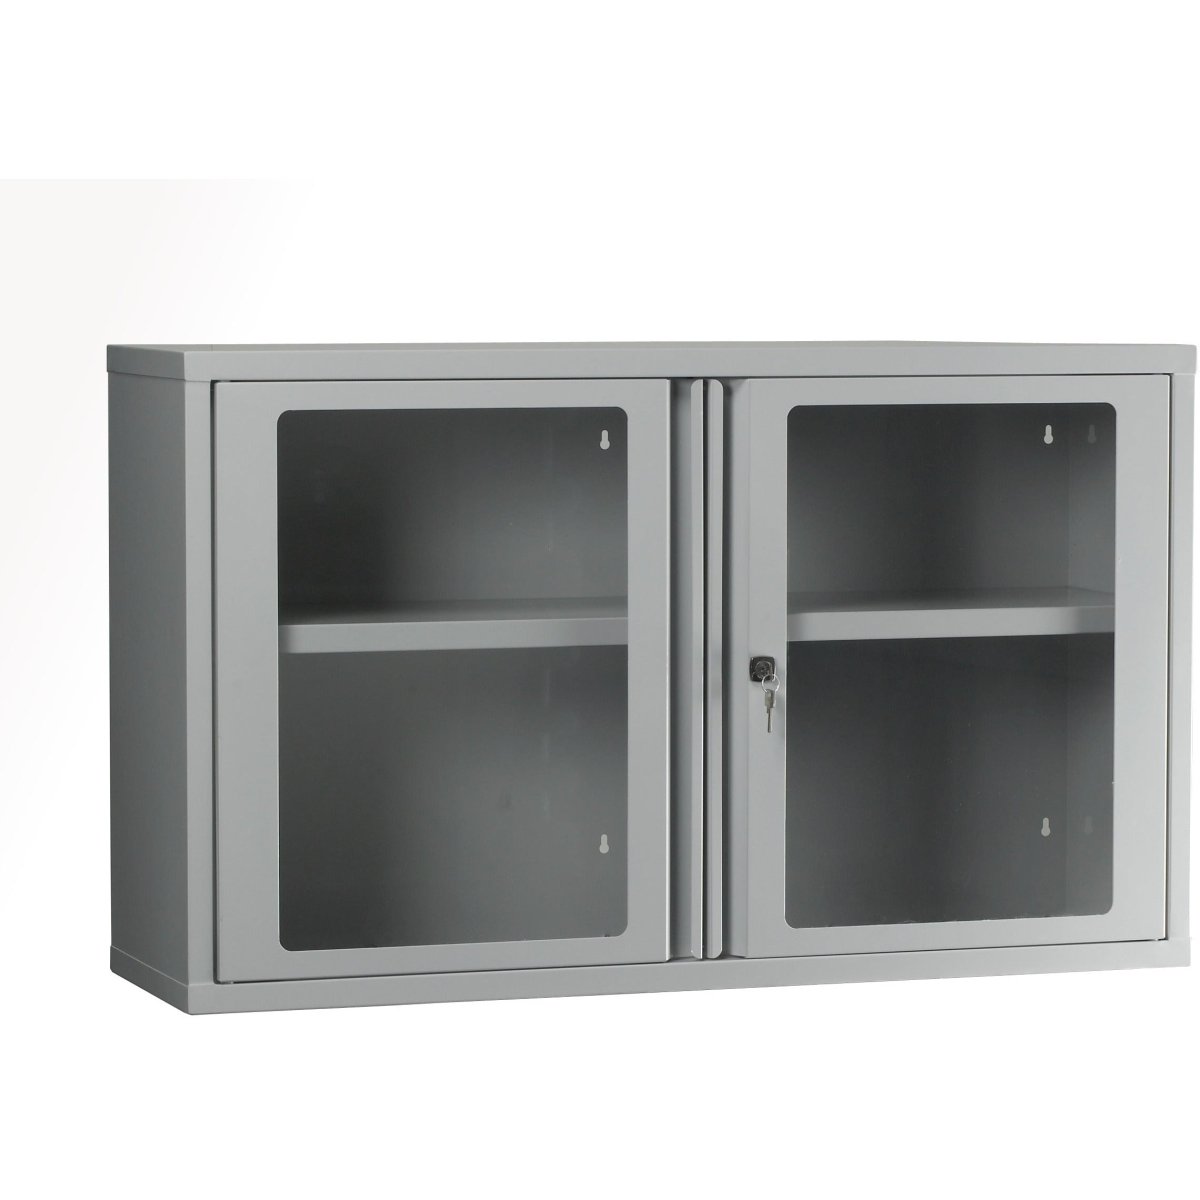 Heavy Duty Polycarbonate Wall Cabinet - Warehouse Storage Products